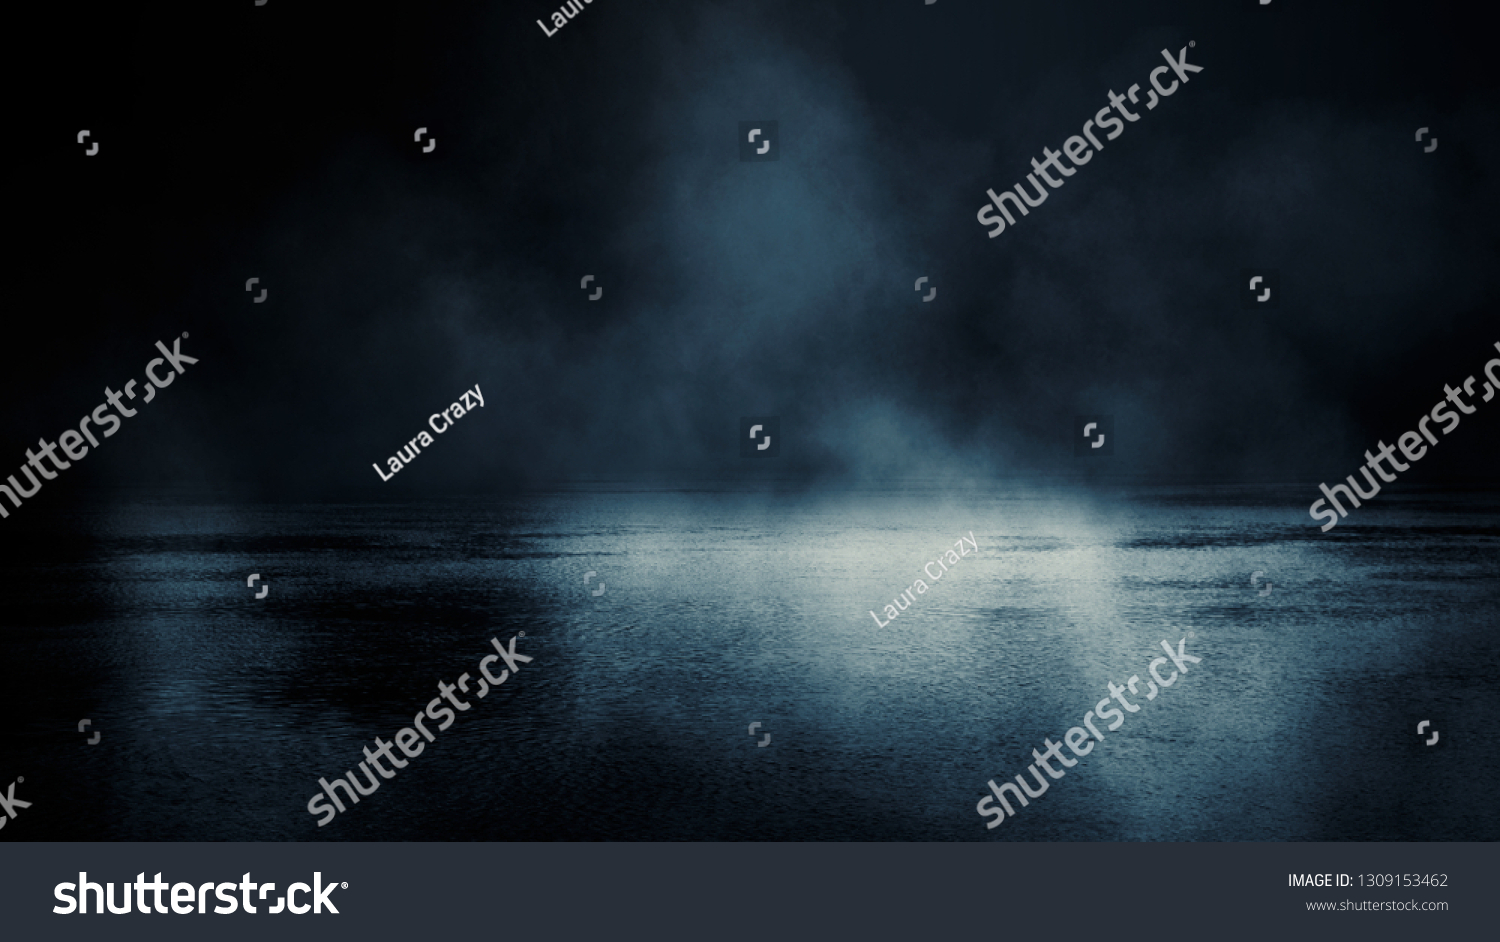 Background scene of empty street. Night view of the river, the night sky with clouds, the reflection of light on the water. Smoke fog #1309153462